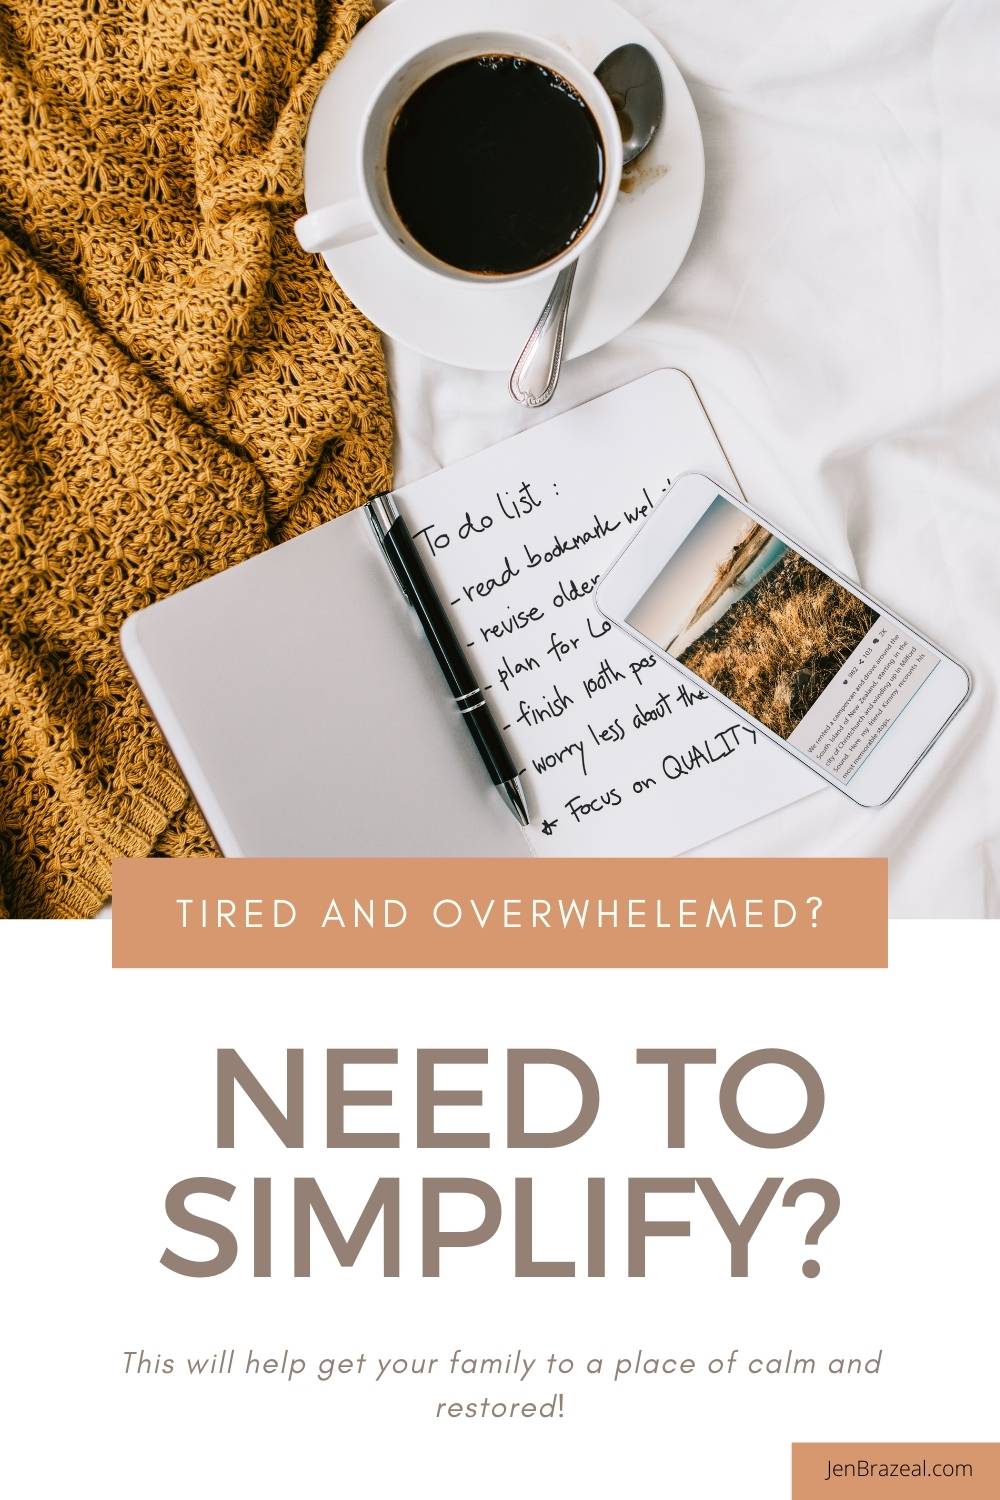 Do you need to simplify? Tune in to this episode of The Unhurried Life!